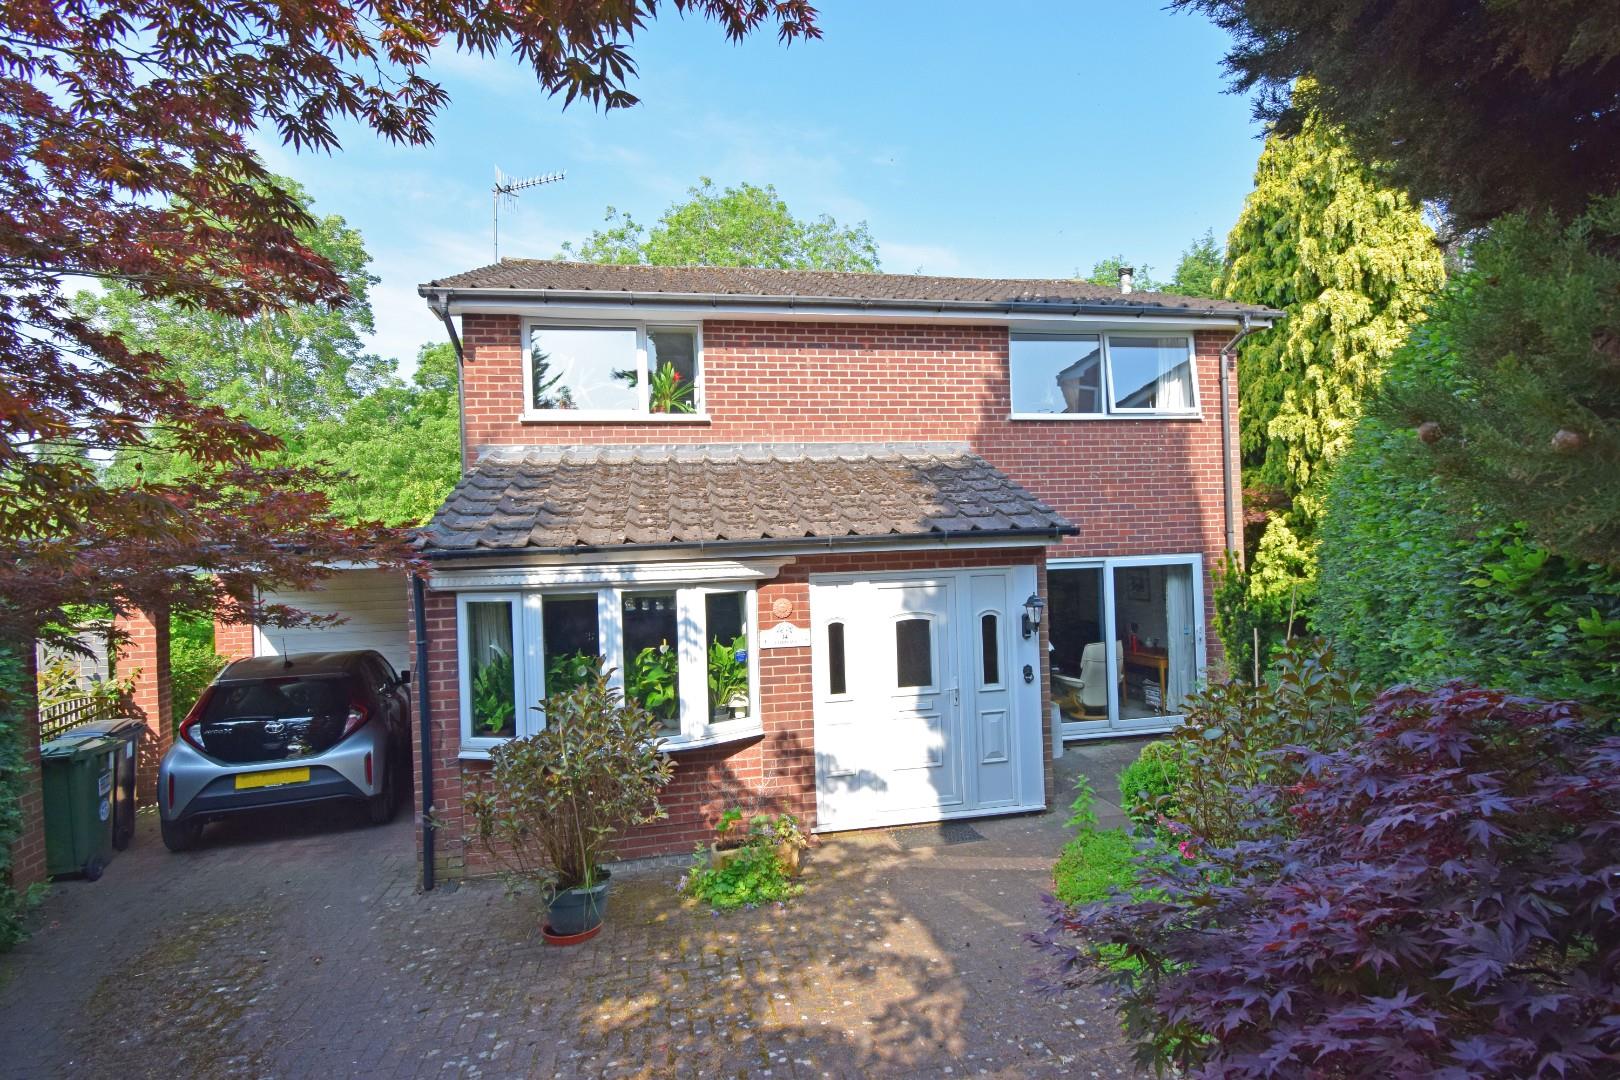 14 Manor Close, Droitwich, Worcestershire, WR9 8HG